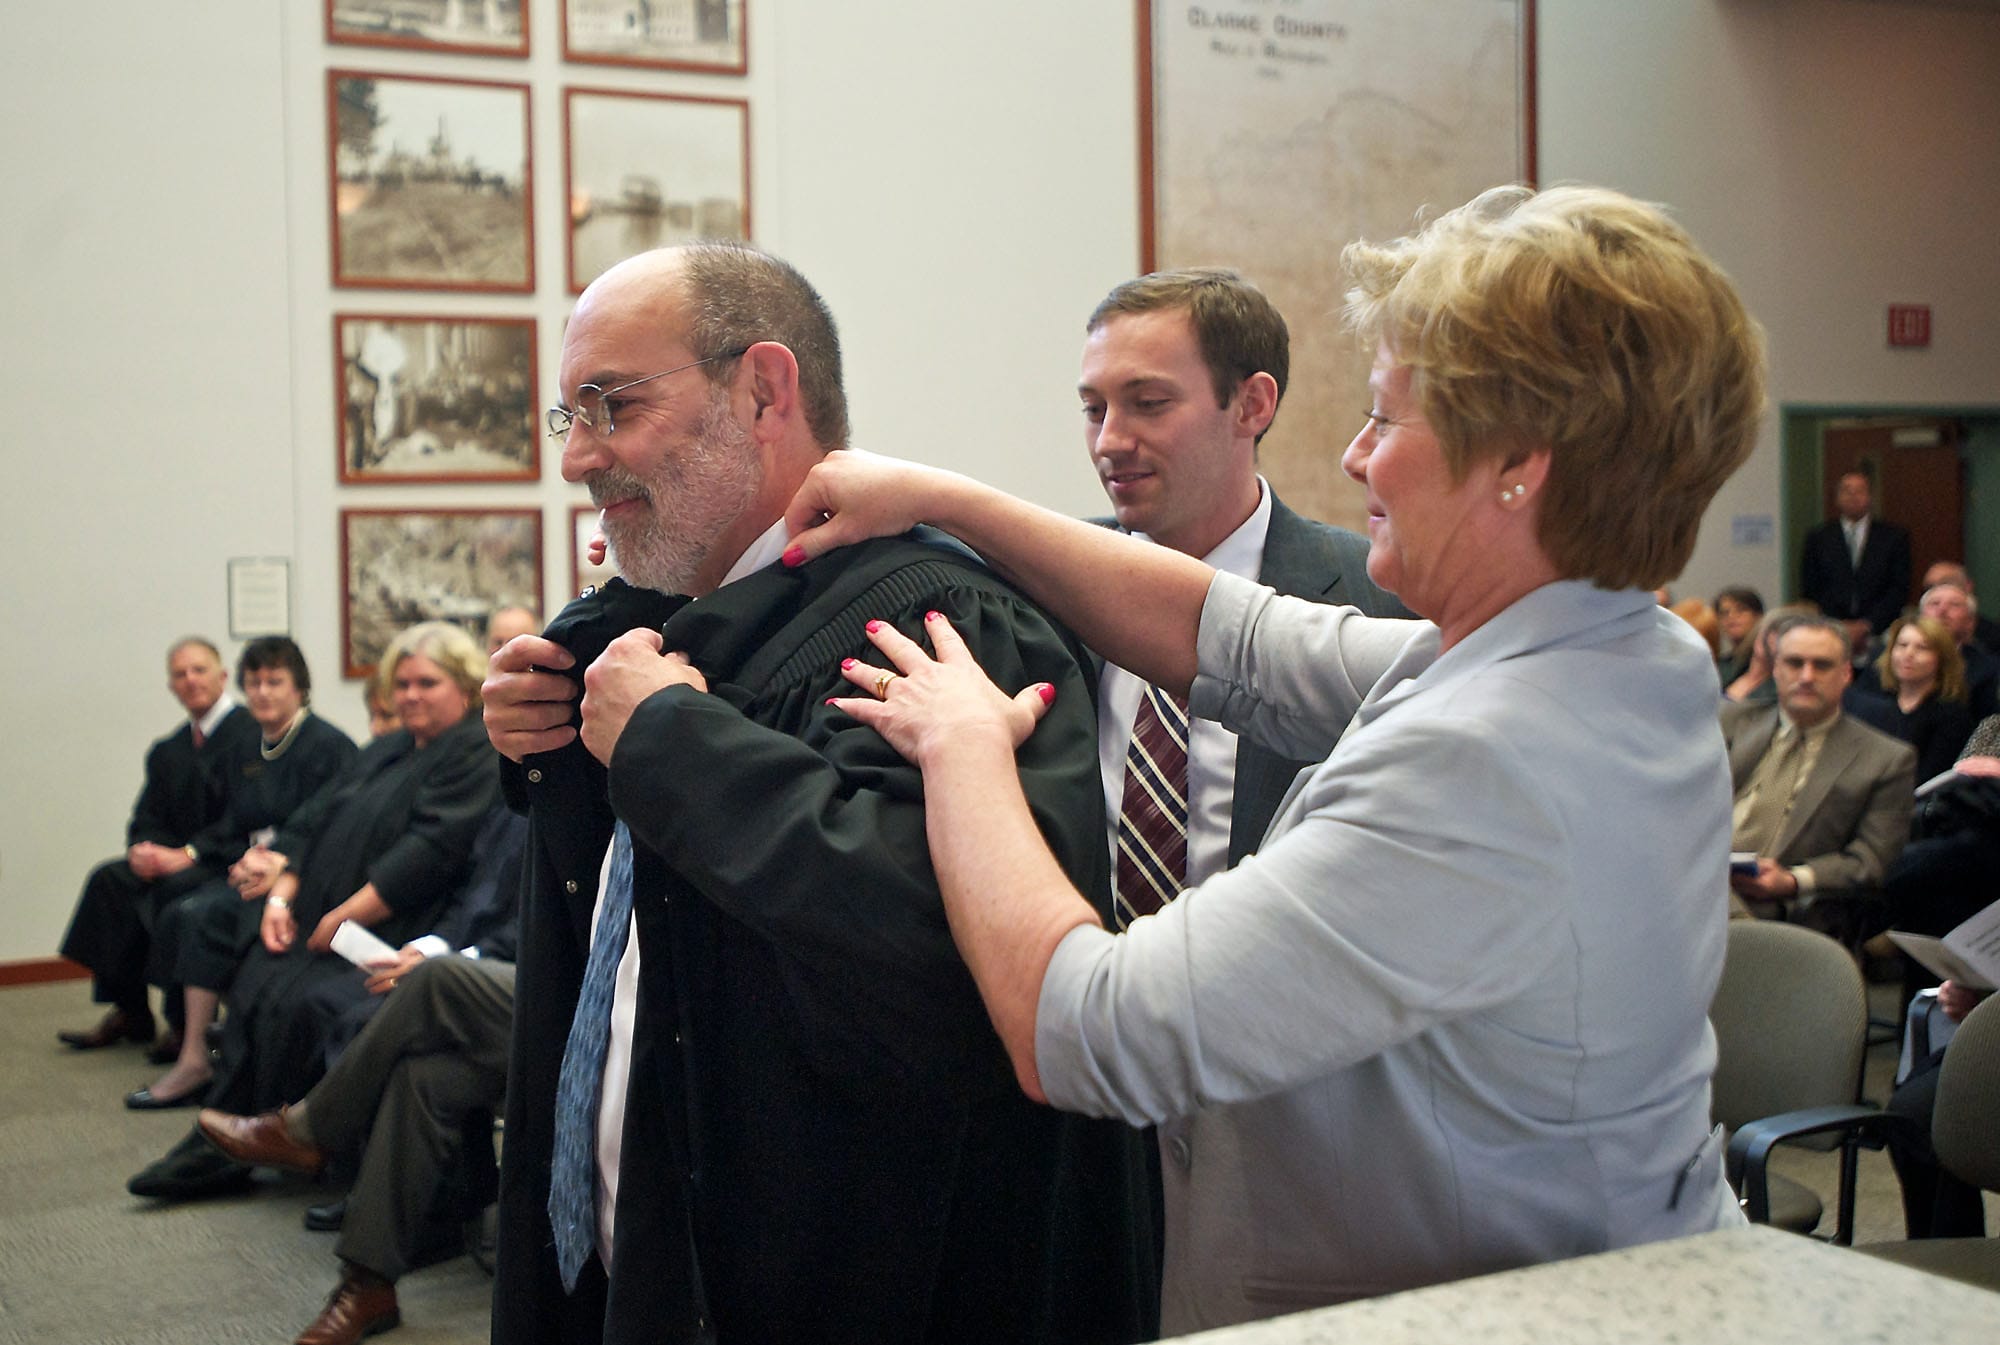 Rich Melnick gets help with his robe on Wednesday from his wife, Lori, and son, Ben, after he was ceremonially sworn in as a judge of the Washington state Court of Appeals Division 2.